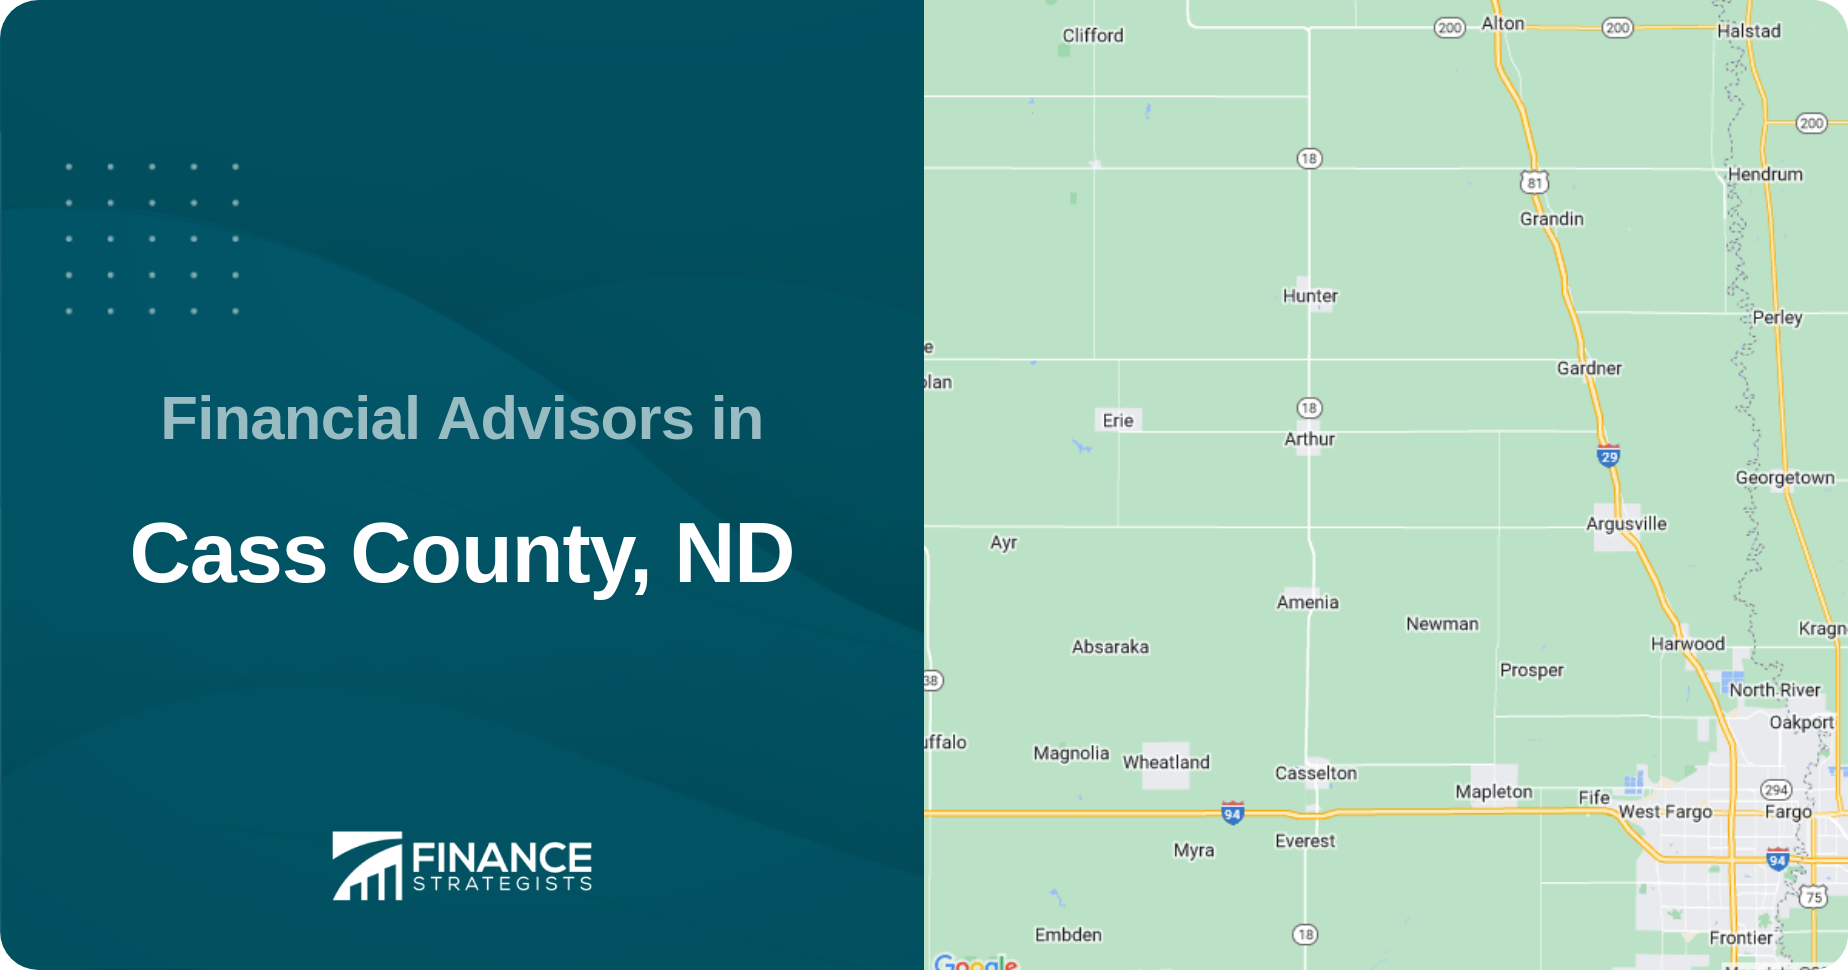 Financial Advisors in Cass County, ND